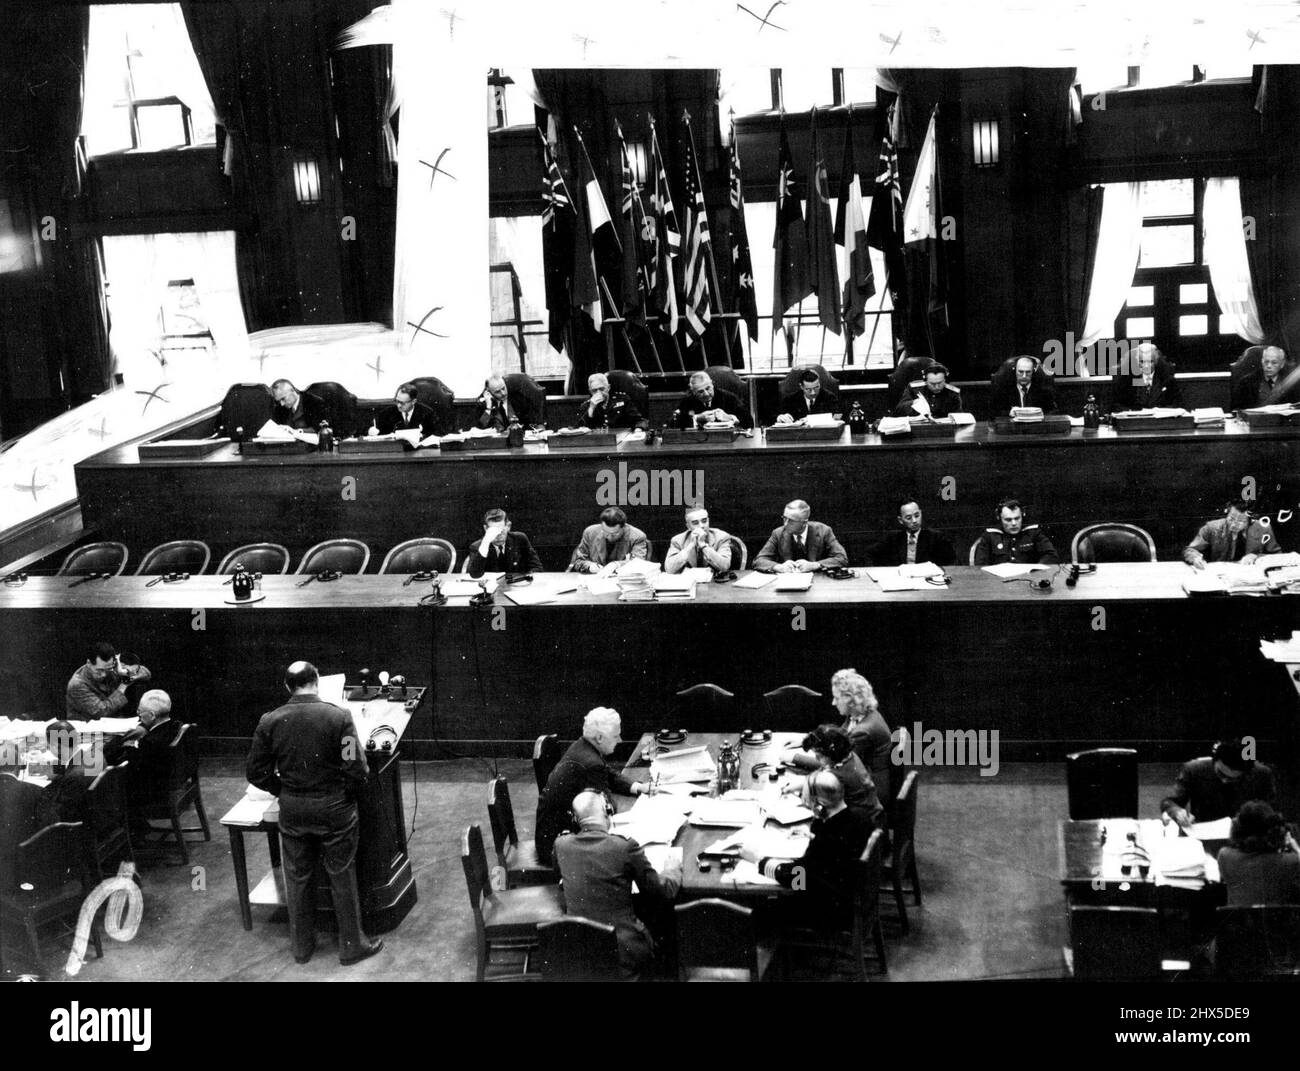 Heading from Stage to Beacon: The War Crimes Tribunal in Session, pictures showing Judges., Pal (India) Roling (Netherlands). McDougal (Canada). Patrick (Great Britain). Higgins (U.S.A.) Webb (Australia). Mei (China) Zaryanov (U.S.S.R.) Bernard (France). Northcroft (New Zealand). Jaranilla (Philippines). November 27, 1946. Stock Photo